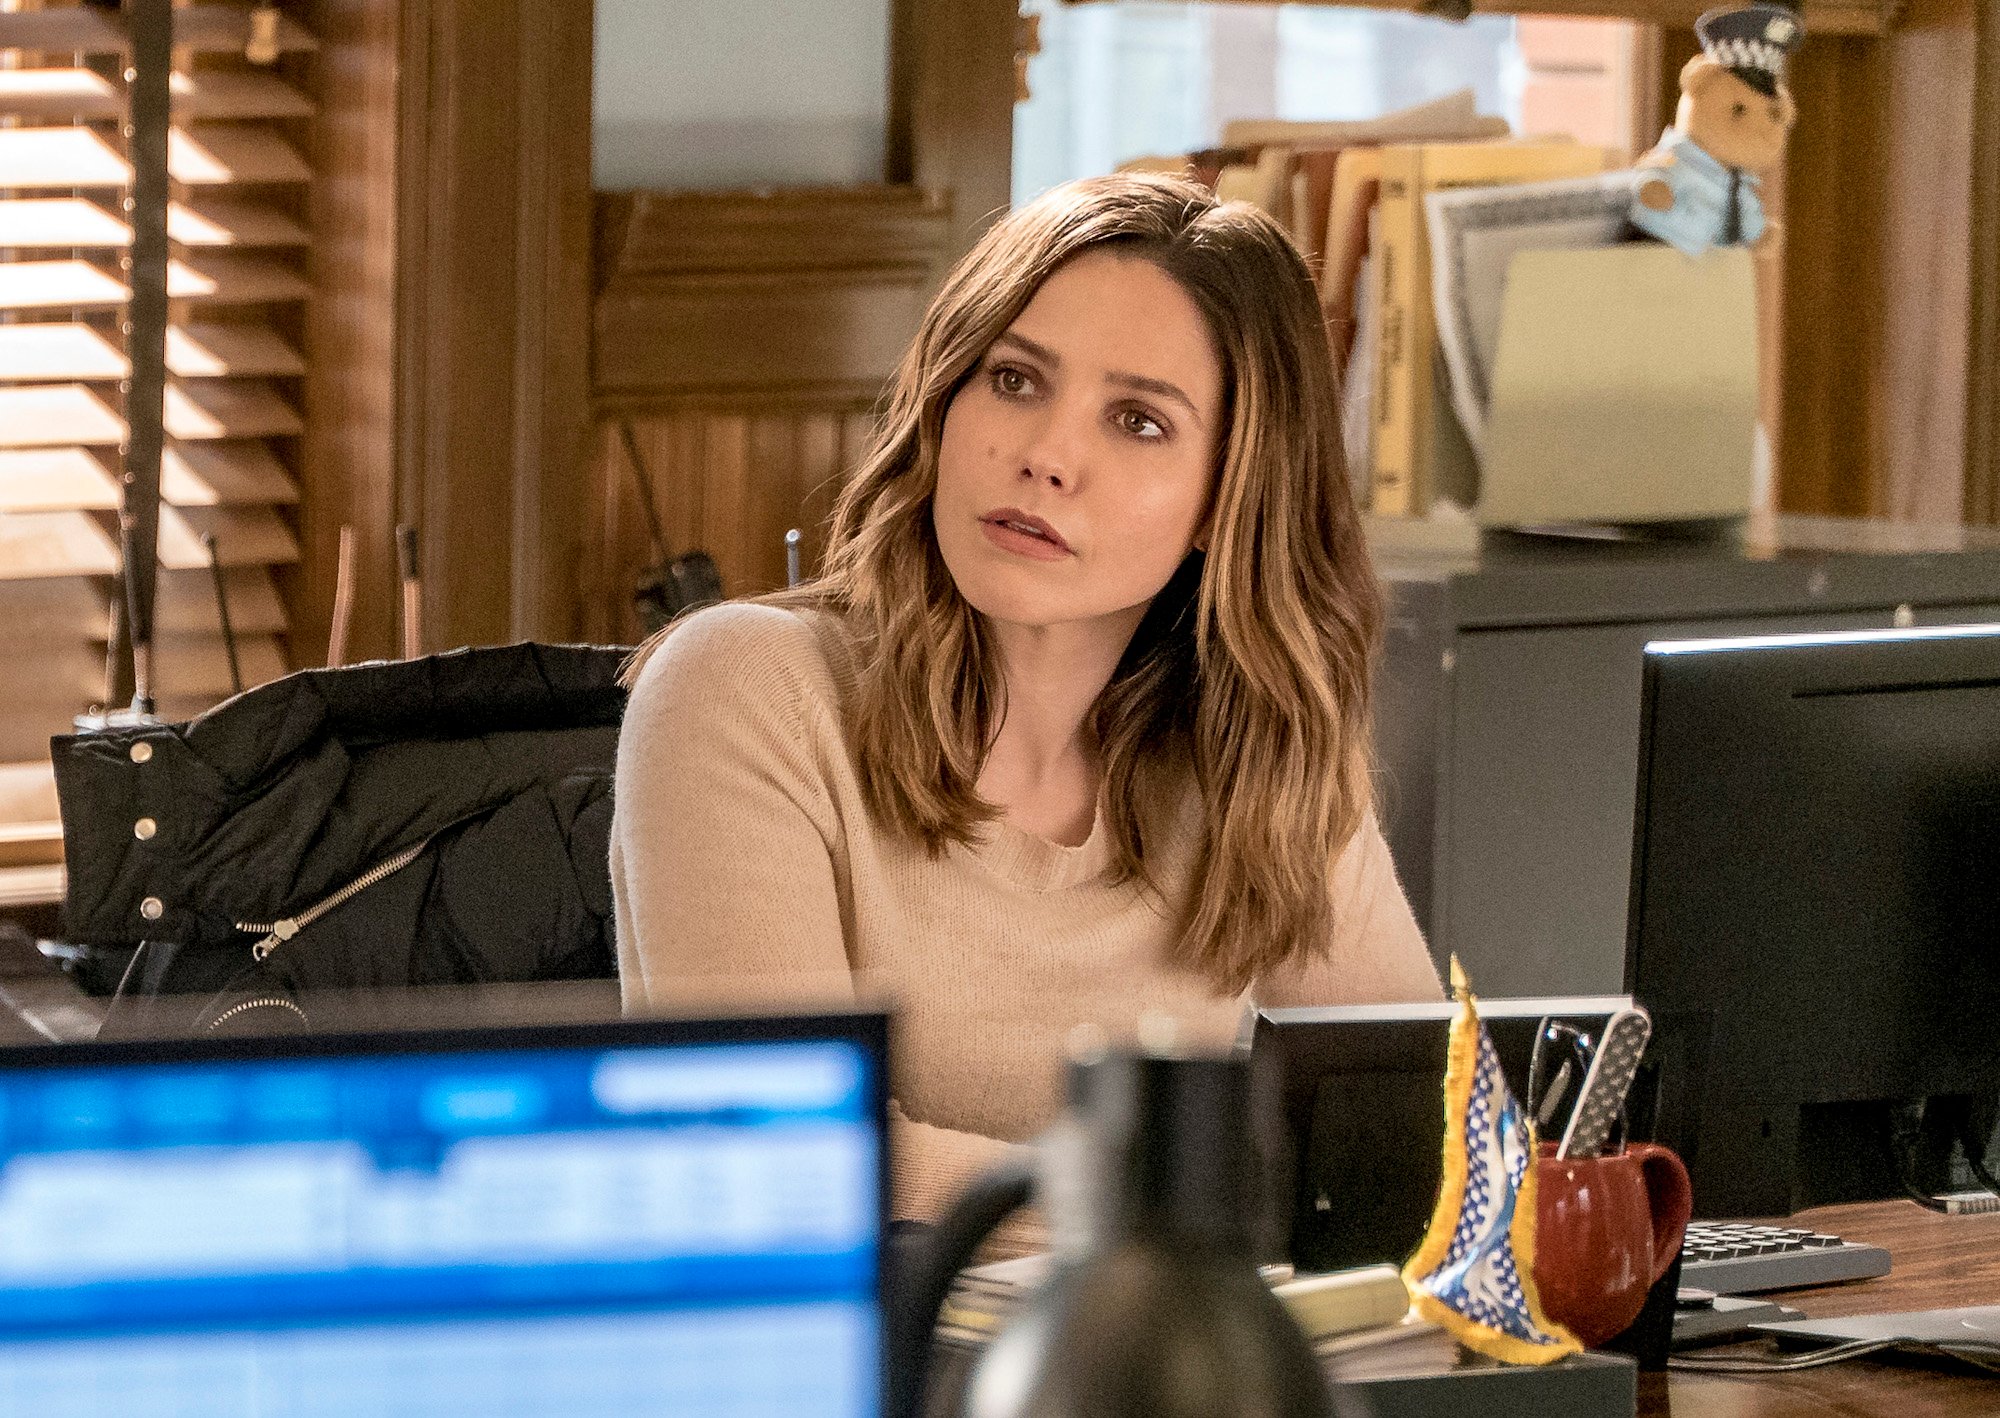 Sophia Bush as Erin Lindsay sitting at a desk, looking to the side